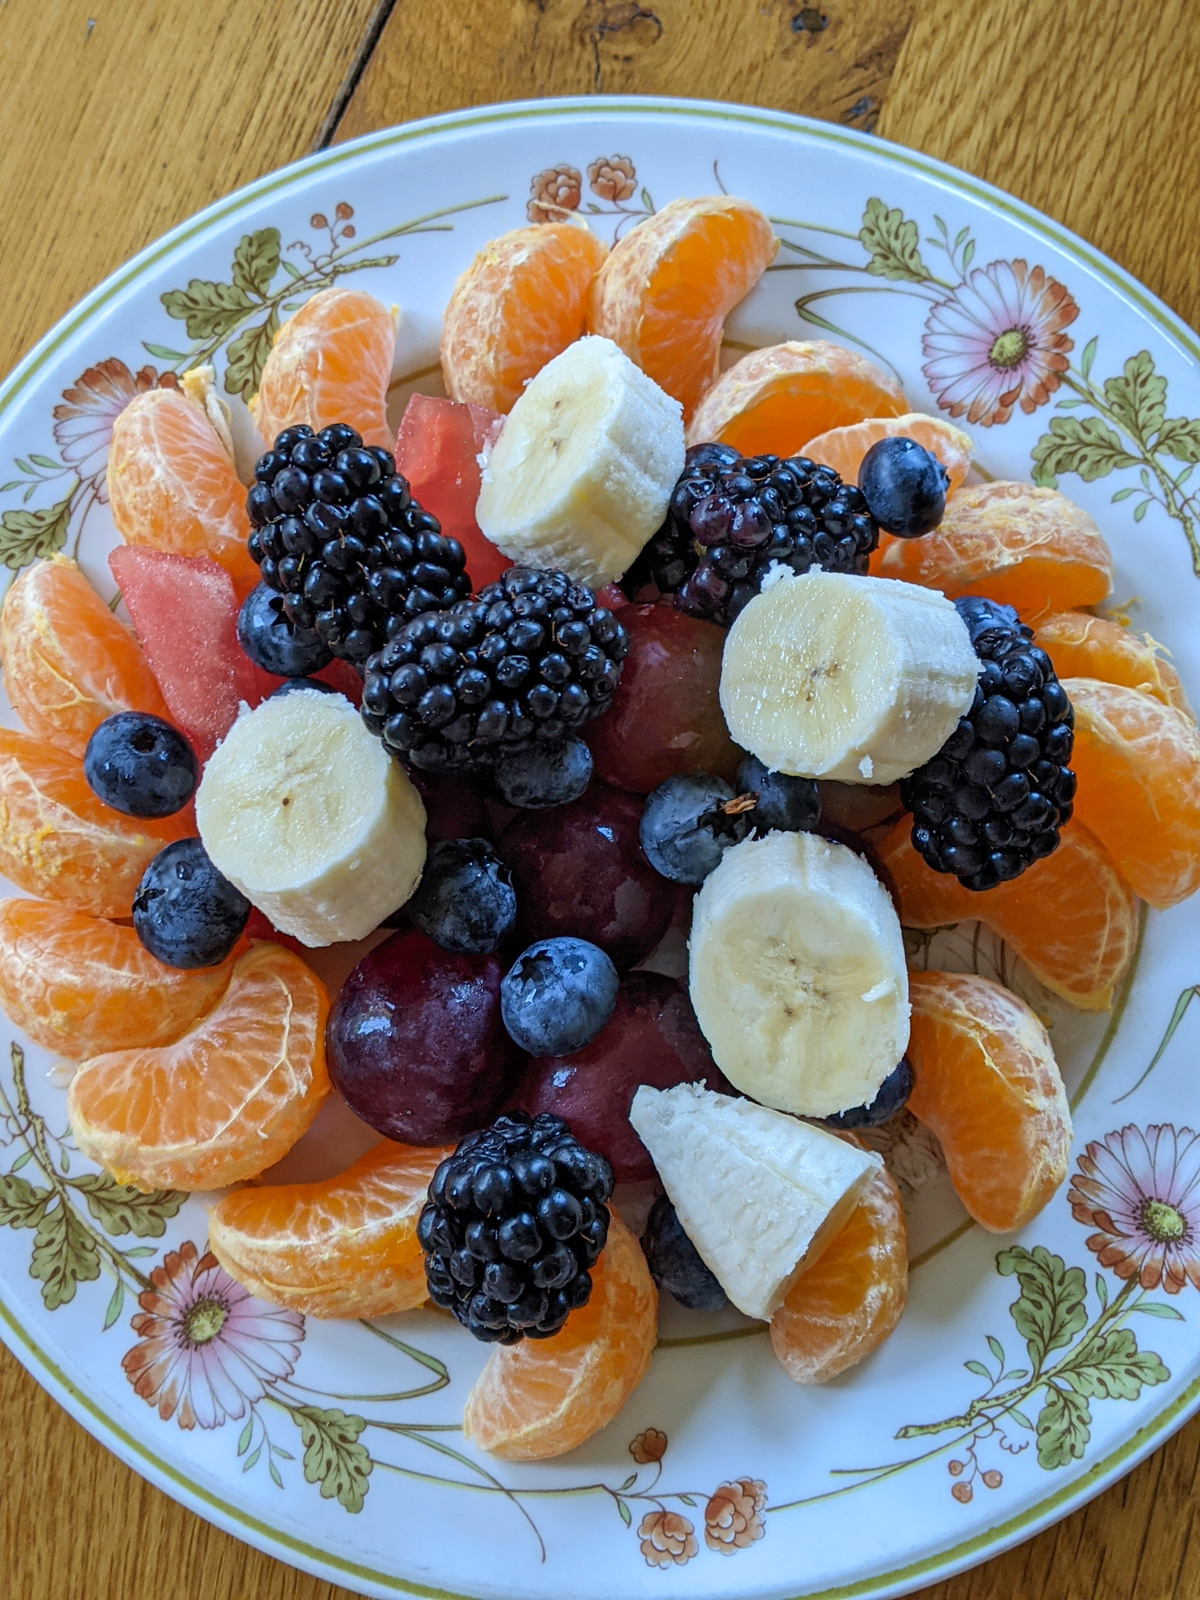 A plate of cutie oranges, blackberries, banana, watermelon, grapes and blueberries.